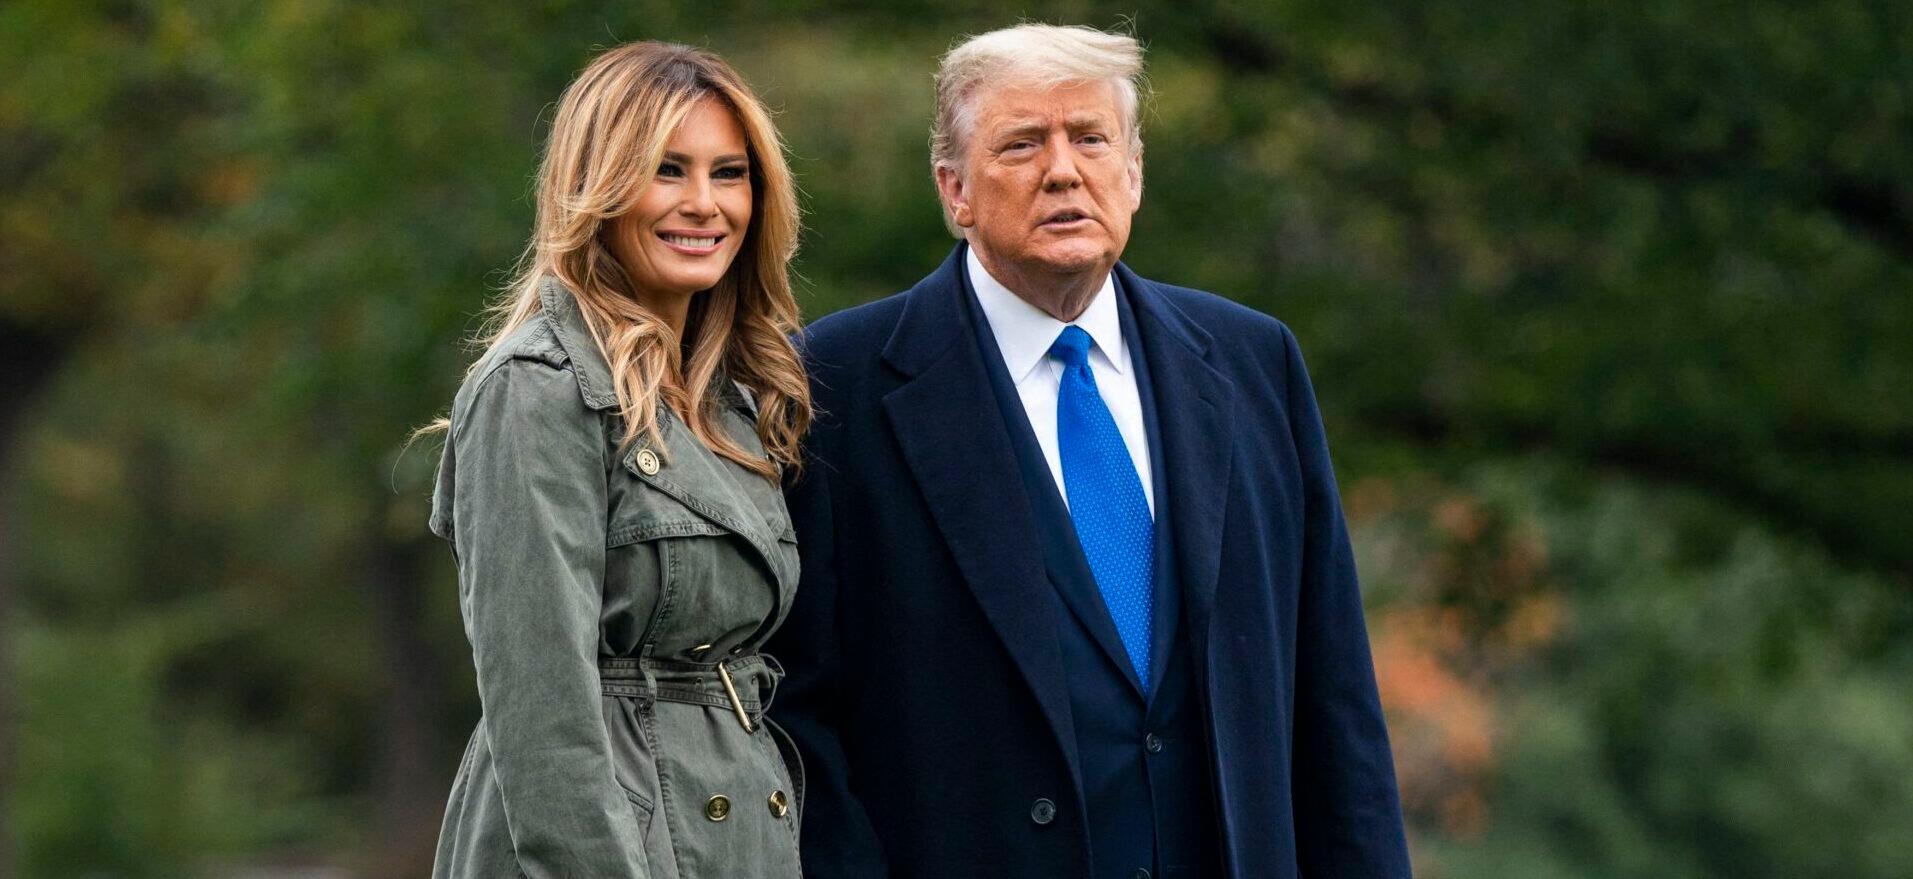 Donald Trump Confirms Mother-In-Law Is ‘Very Ill’ After Melania Missed Mar-a-Lago Christmas Party